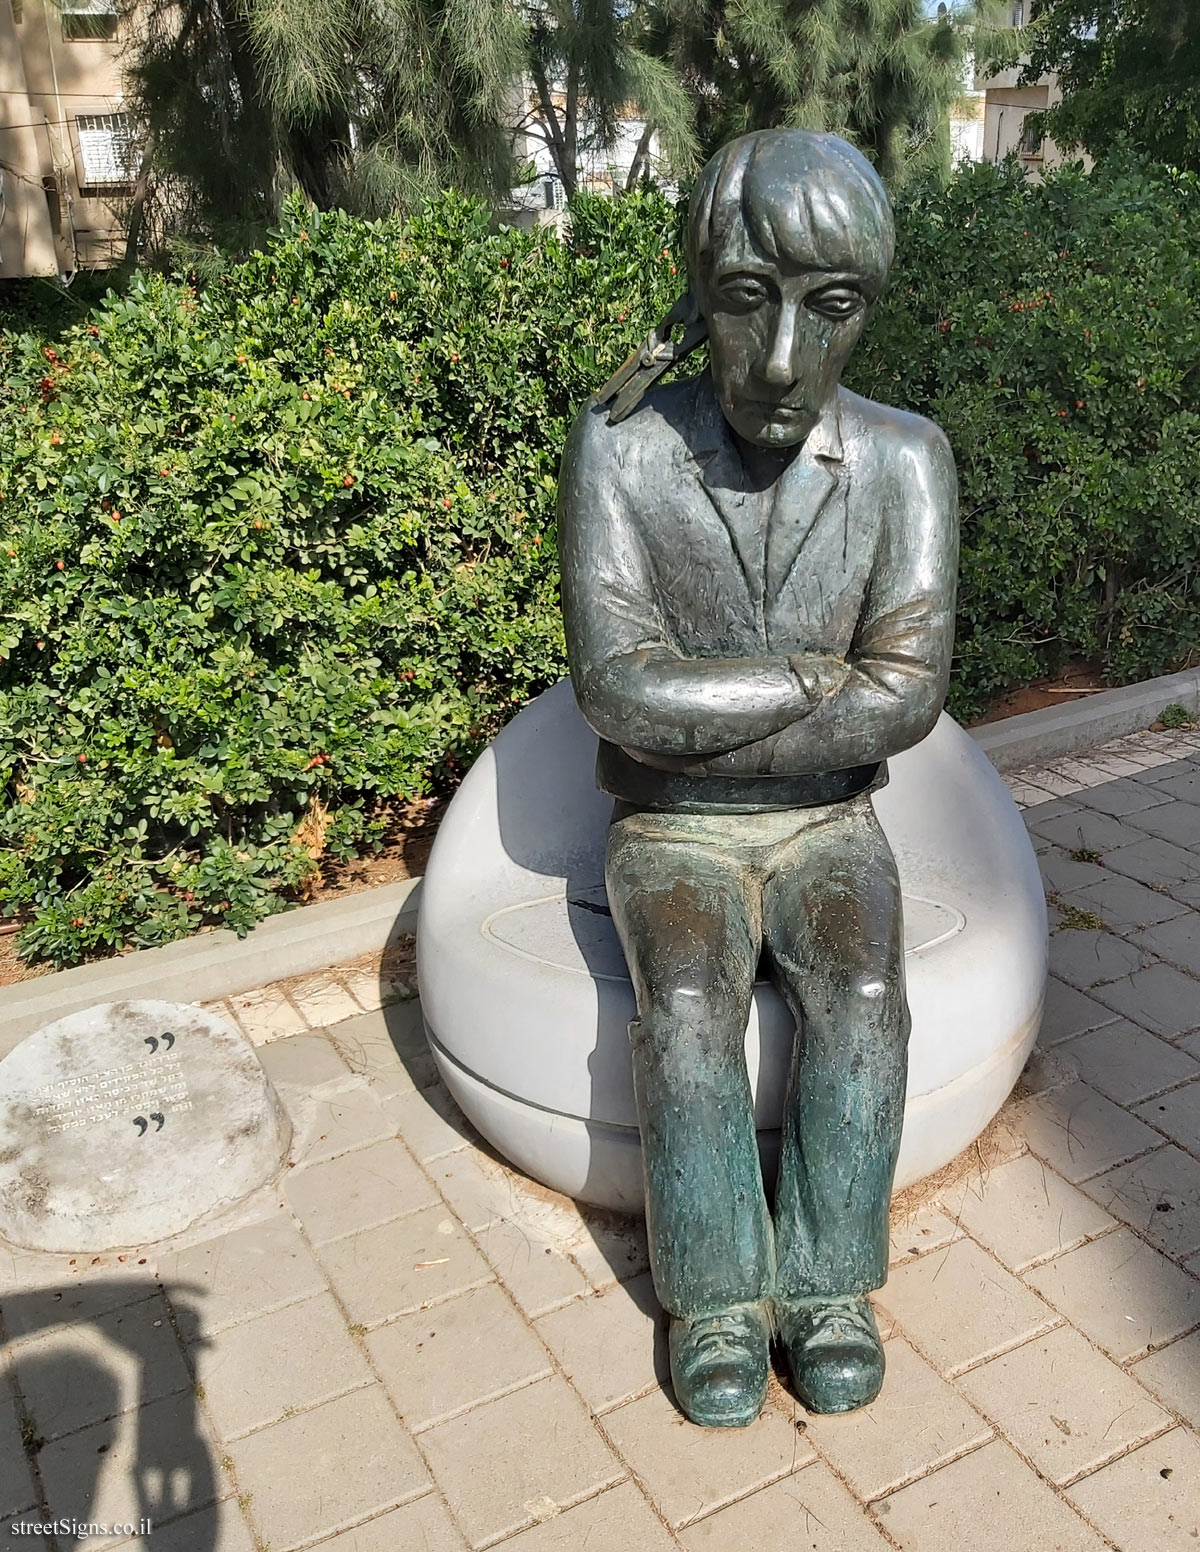 Holon - Story Garden - The plots of Ferdinand Pedhatzur in brief - Quote from the book 2 - A clerk with a washing stick in his ear